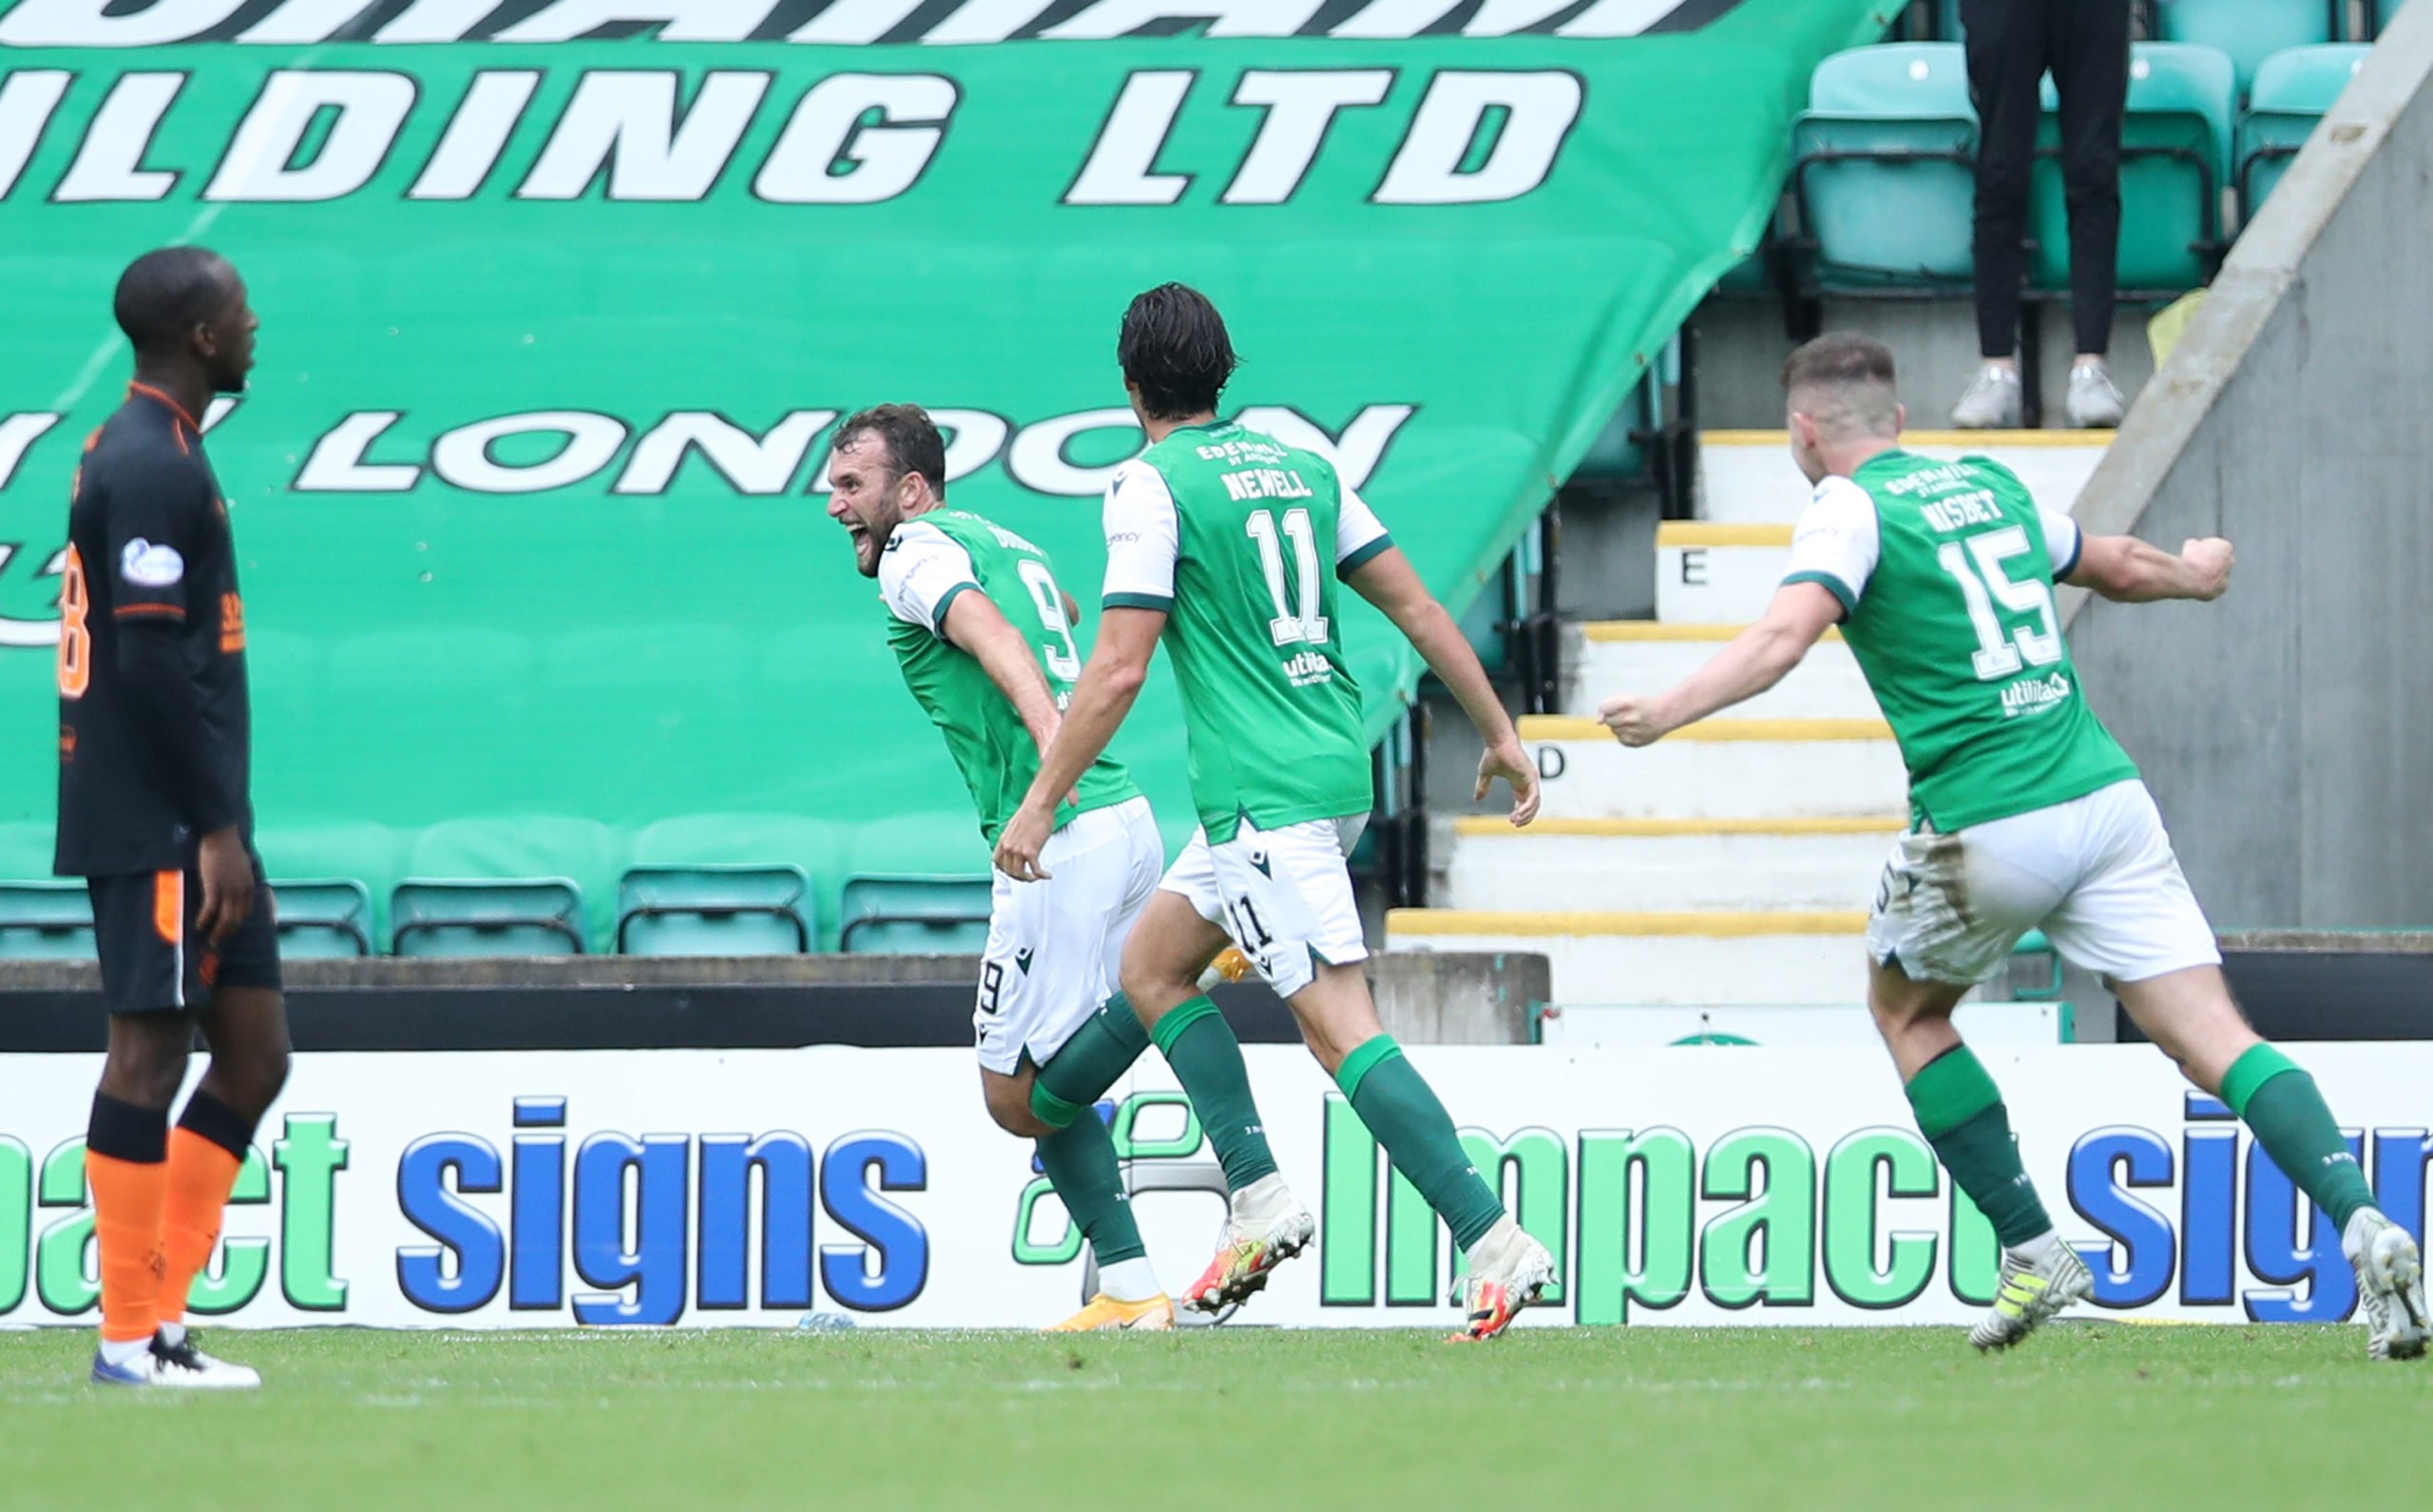 Allan missed Hibs' draw with Rangers